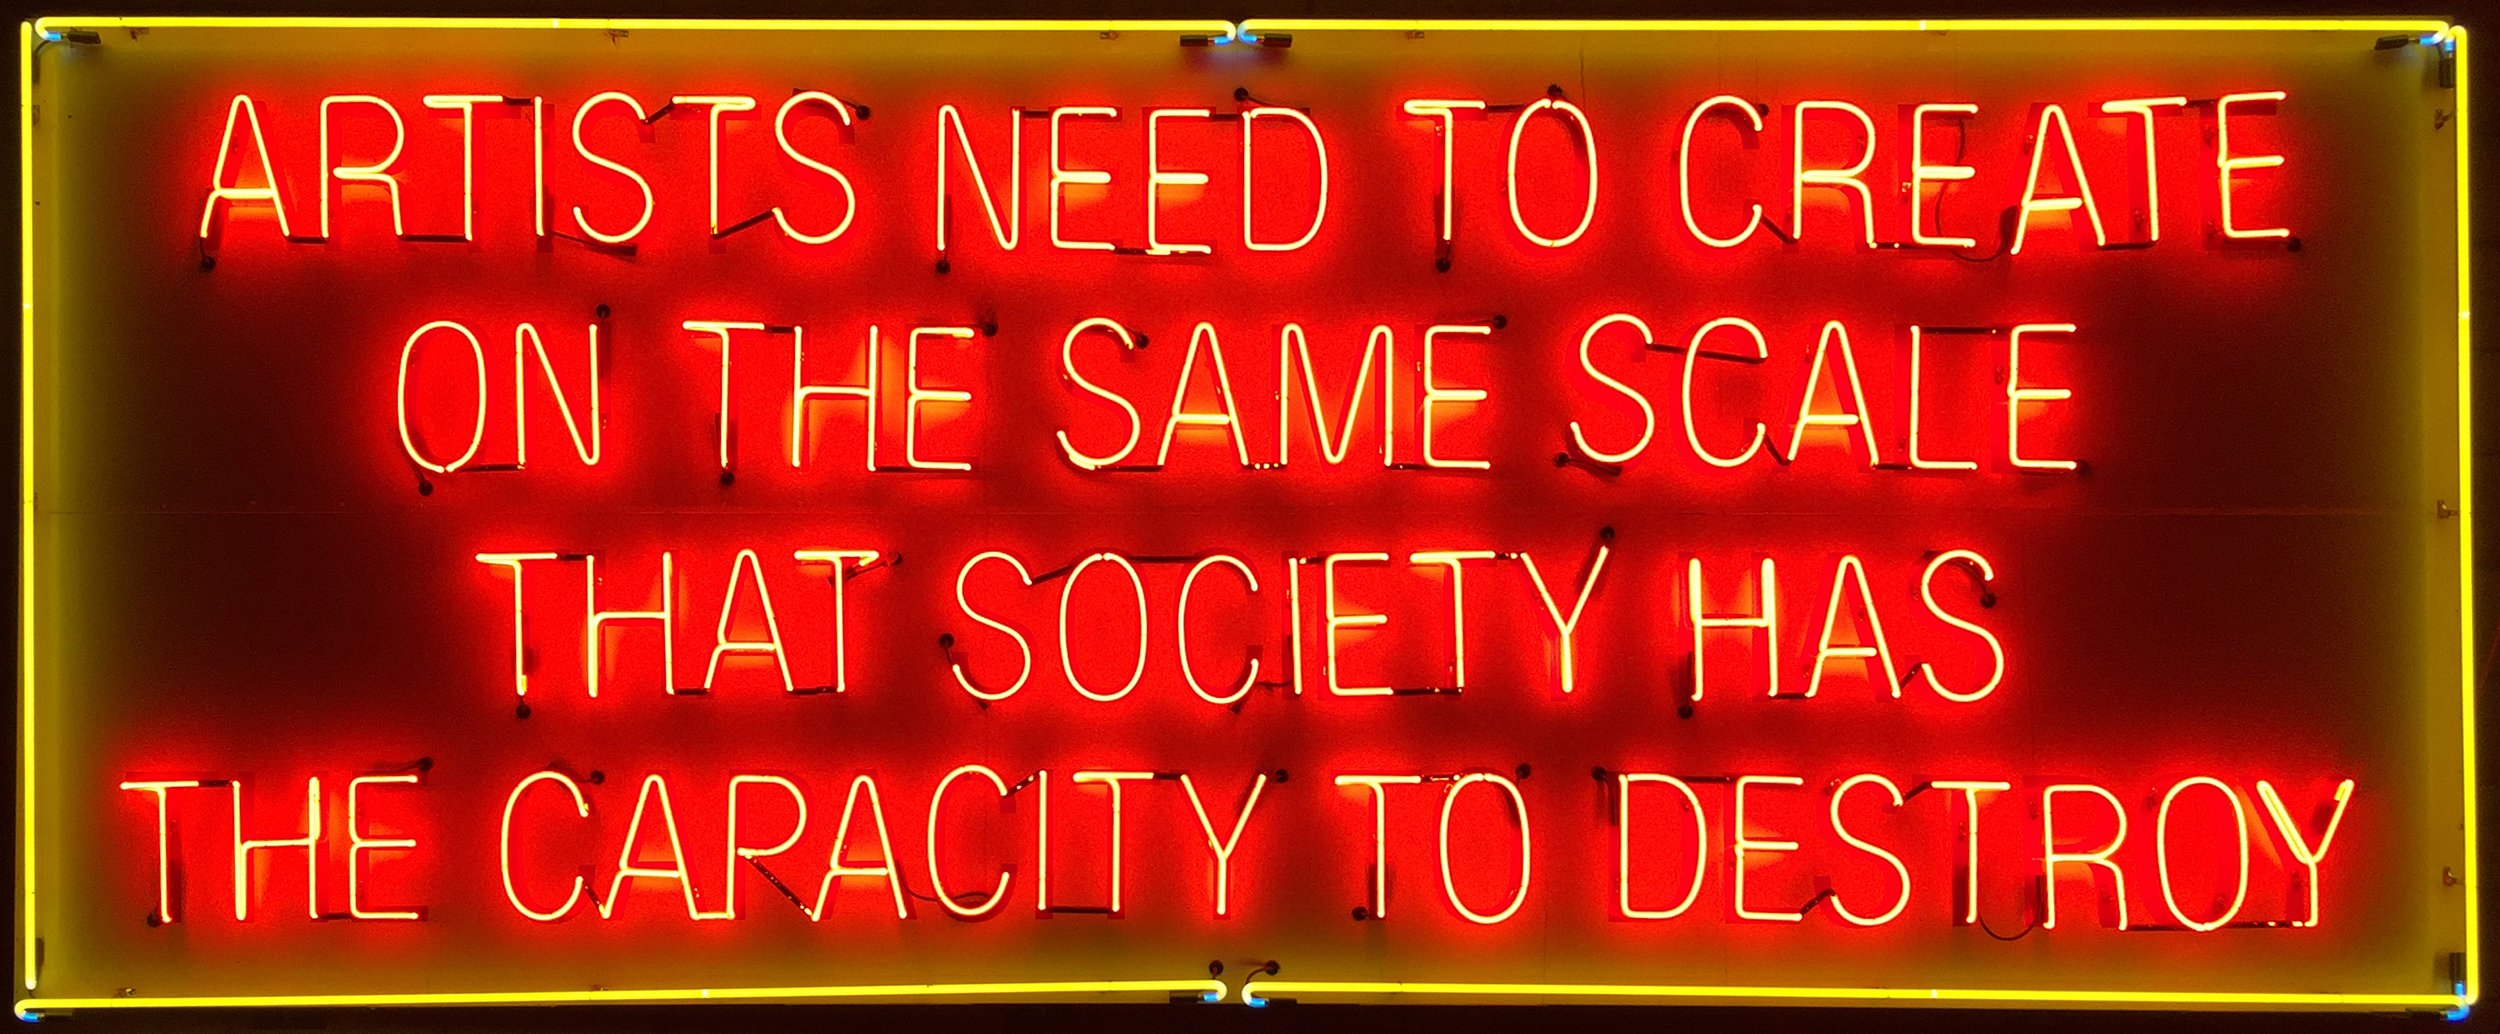 37. Lauren Bon, Artists Need to Create on the Same Scale that Society Has the Capacity to Destroy, 2022 copy.jpeg